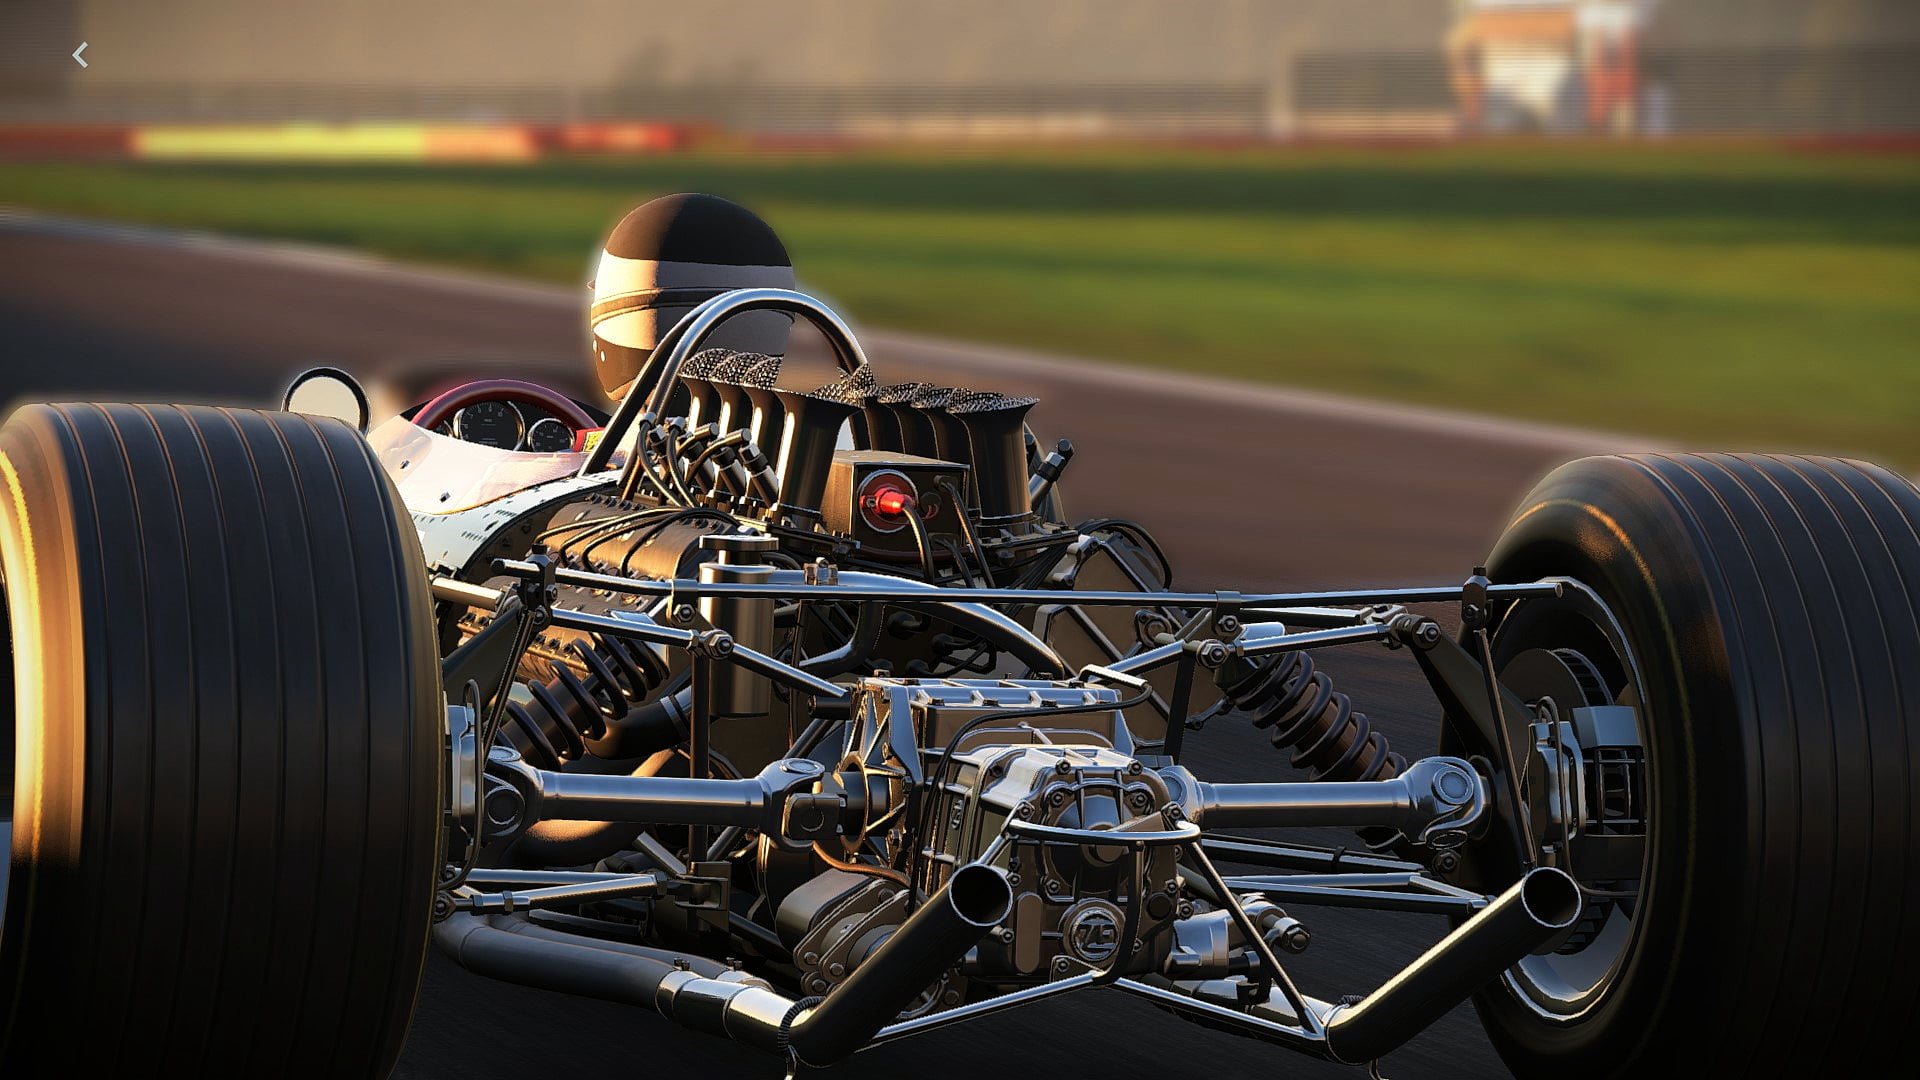 gray and black vehicle, Spa Francorchamps, 1968 Lotus 49, Project cars, video games